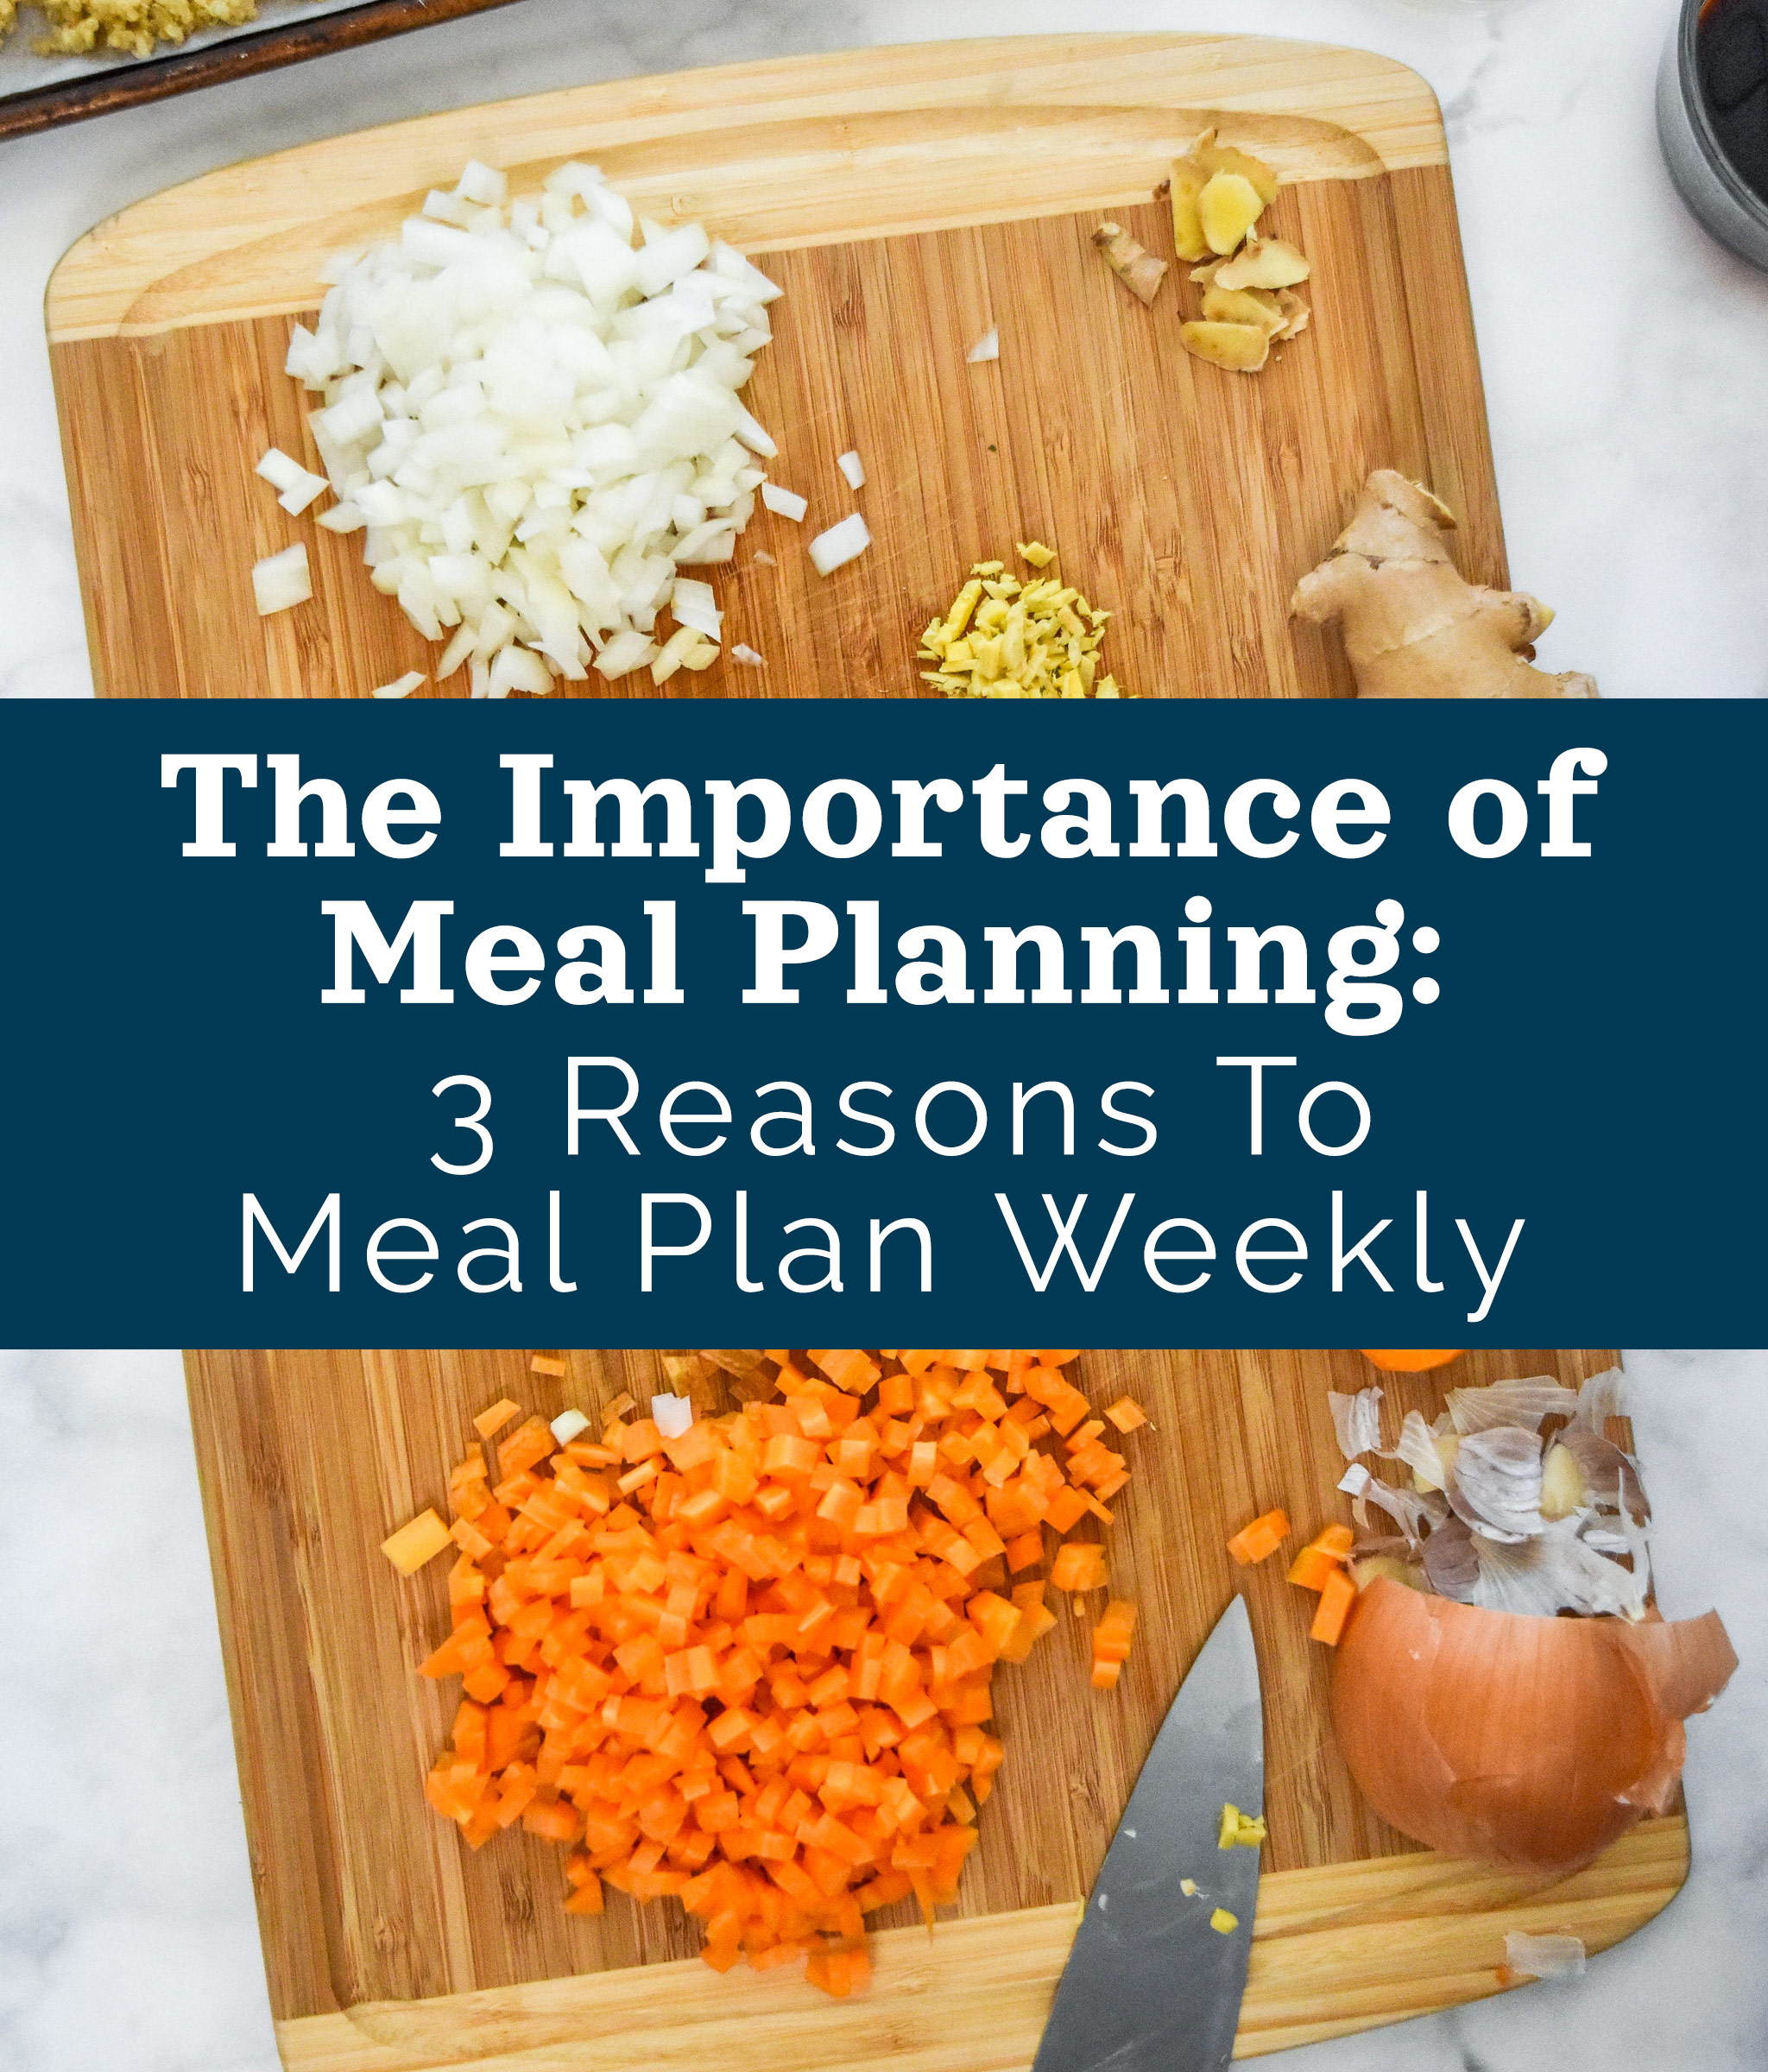 cover image cutting board with text over "The Importance of Meal Planning: 3 Reasons to Meal Plan Weekly"